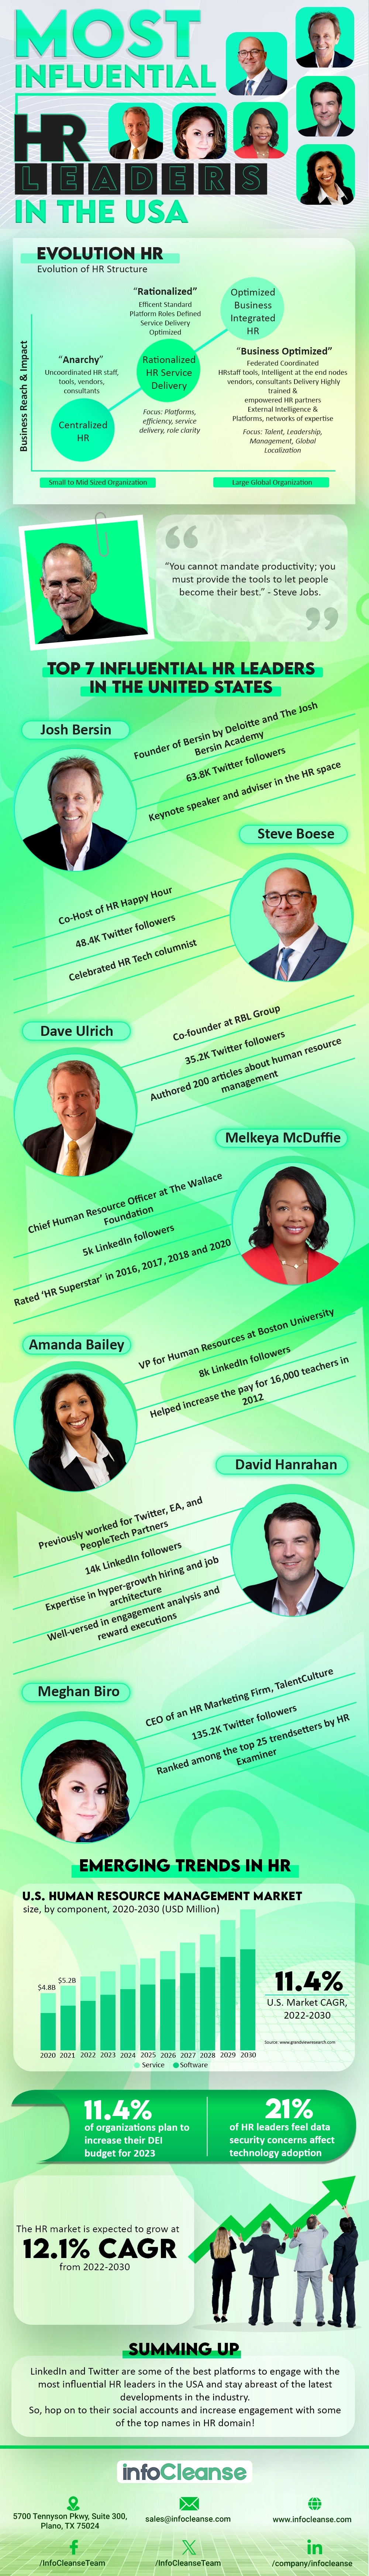 Most Influential HR Leaders in the USA